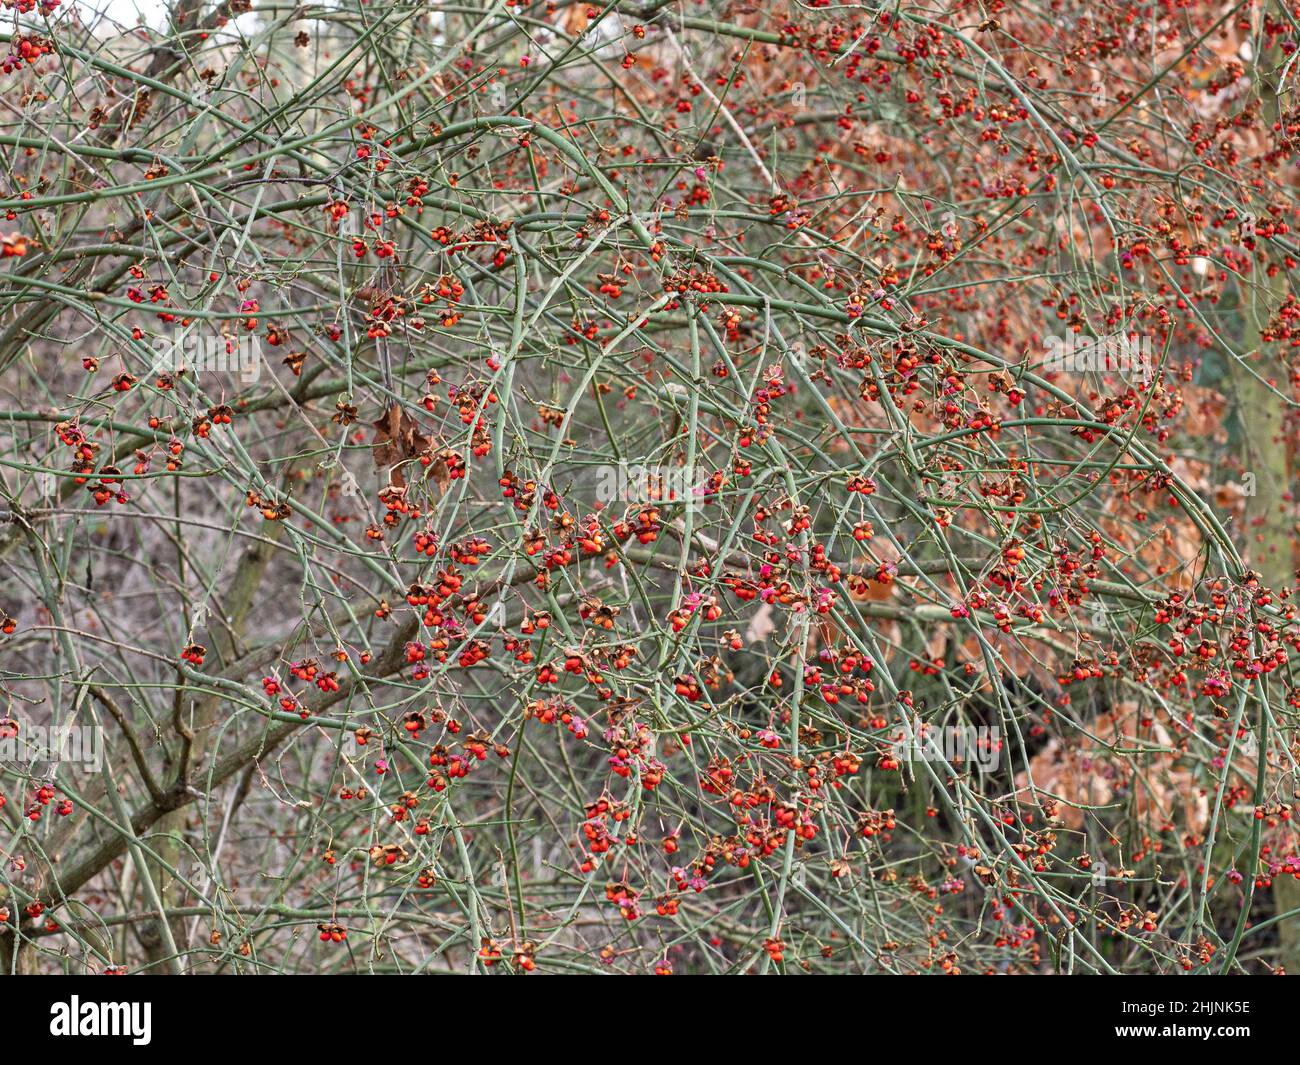 The bright red fruits of Euonymus europaeus shining out in a winter hedgerow Stock Photo